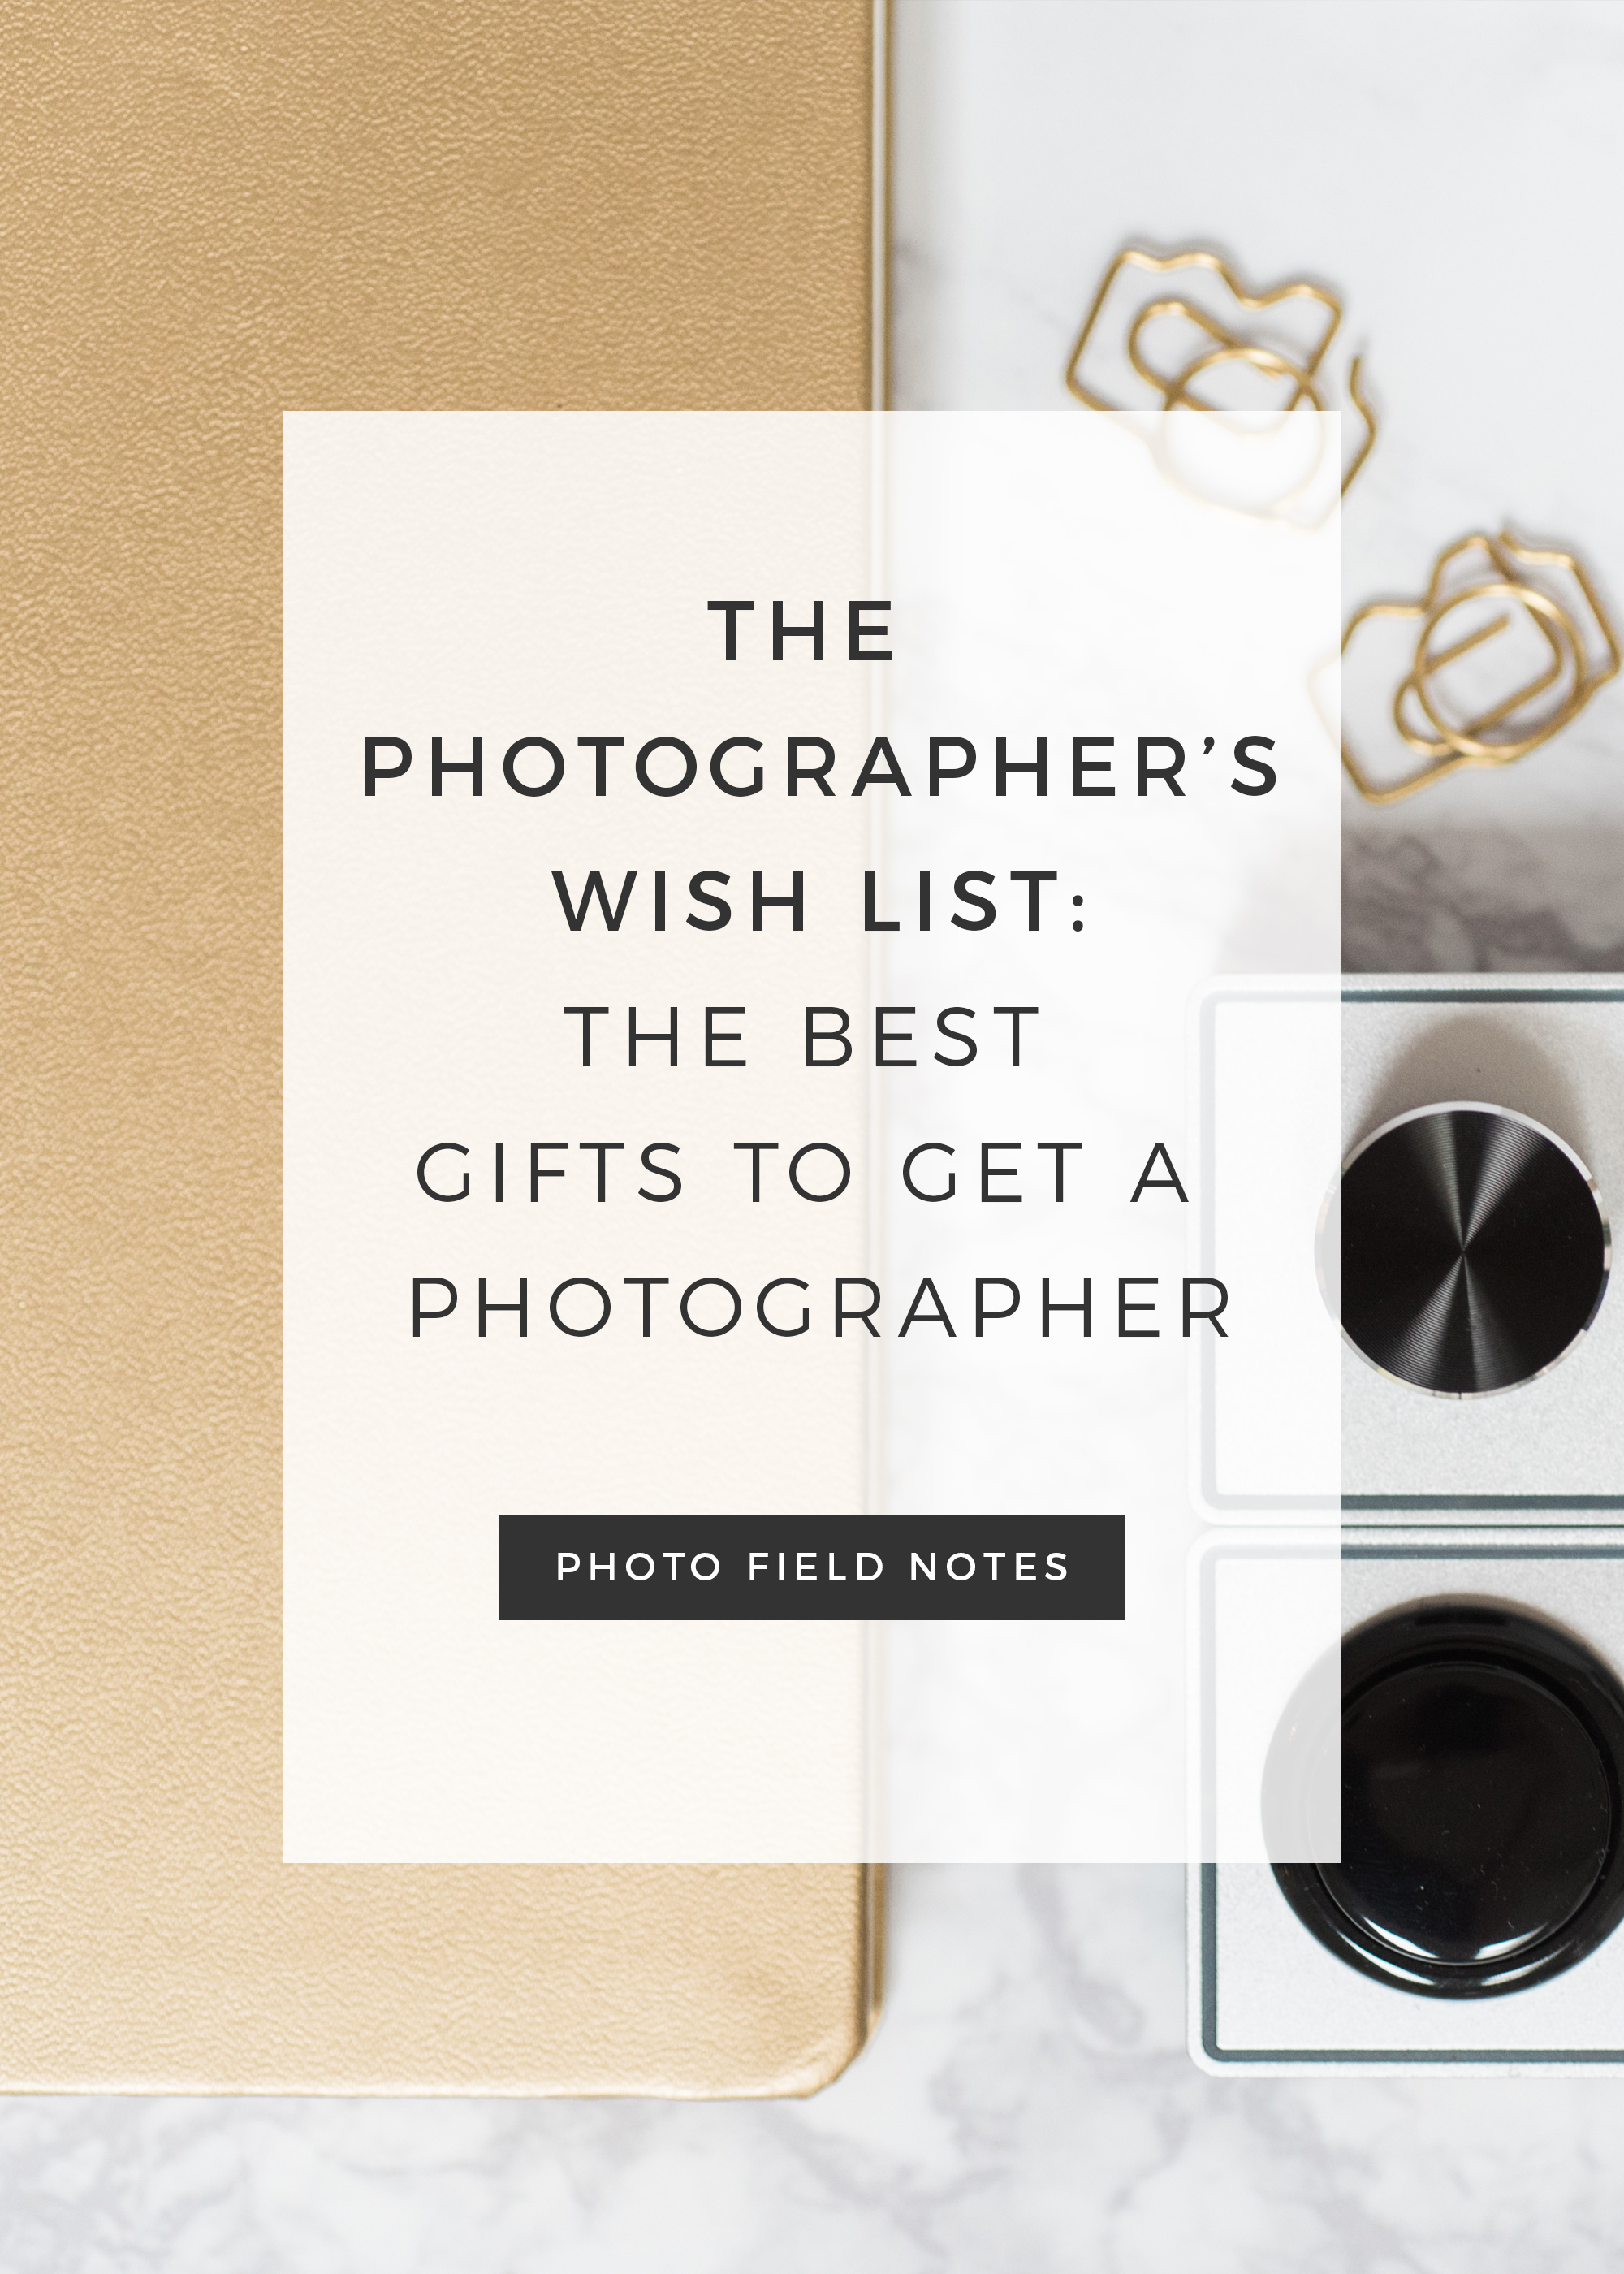 The Photographer's Wish List: the best gifts to get a photographer